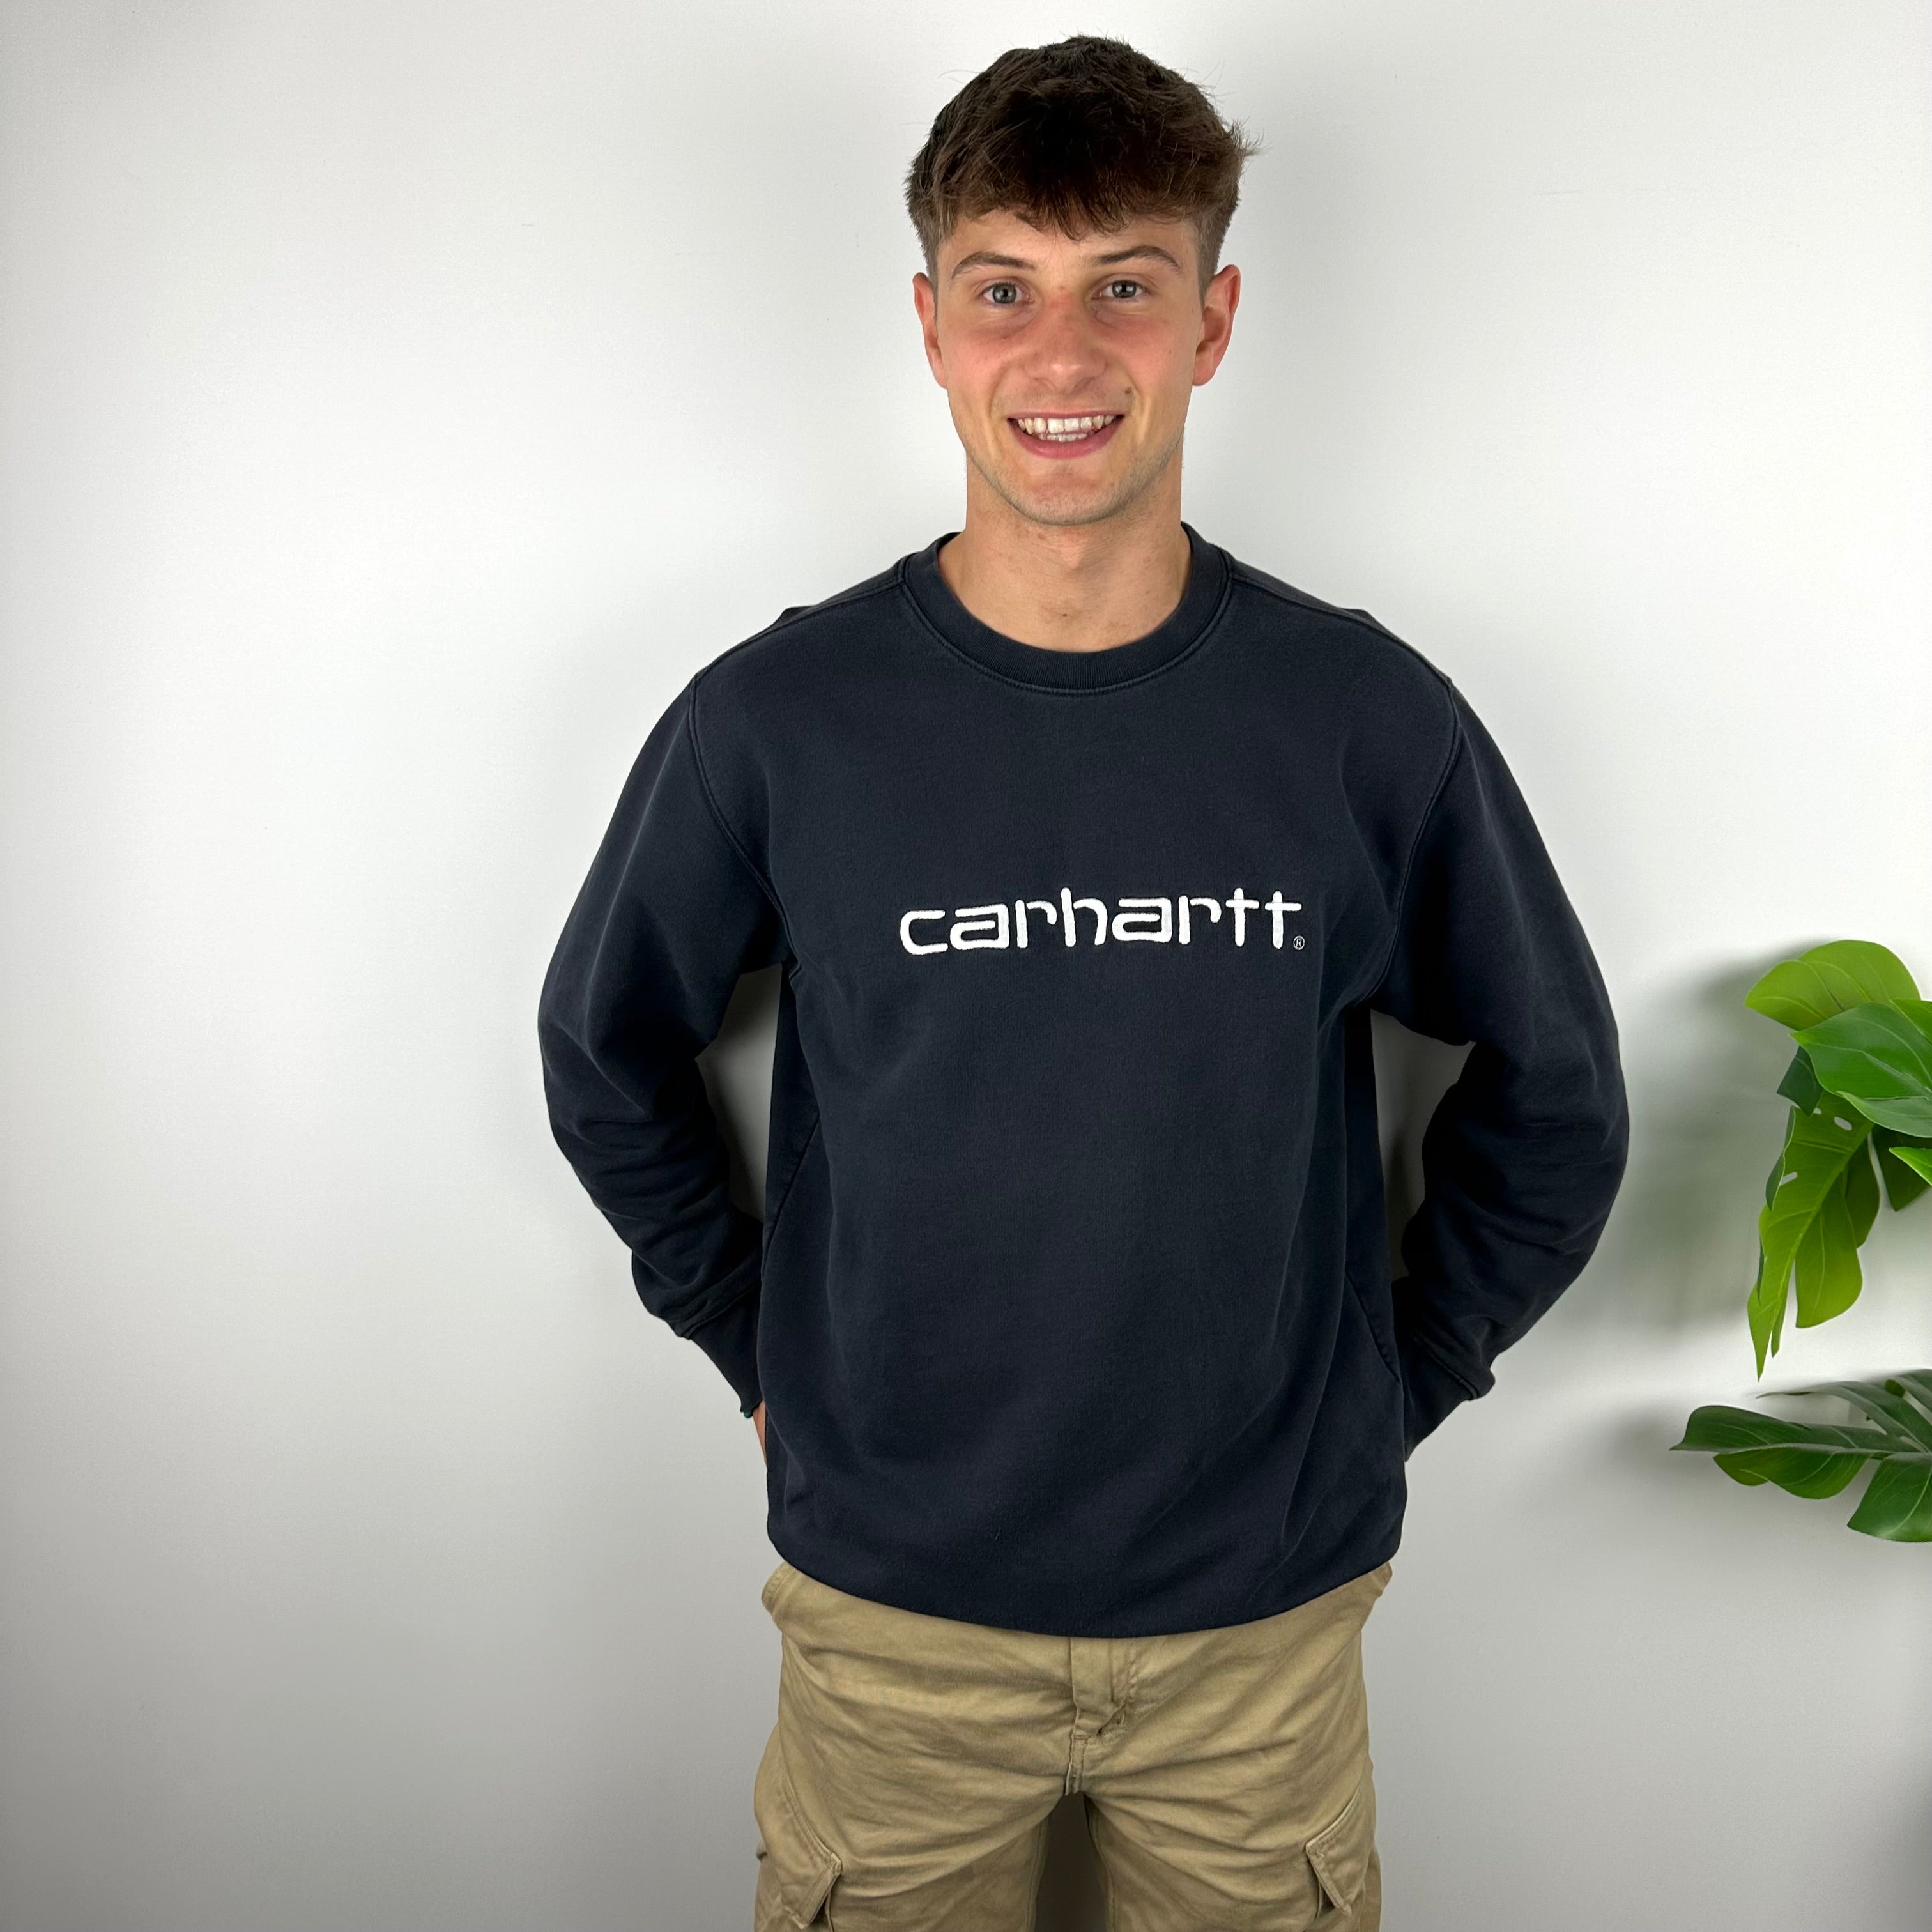 Carhartt Navy Embroidered Spell Out Sweatshirt (XL)